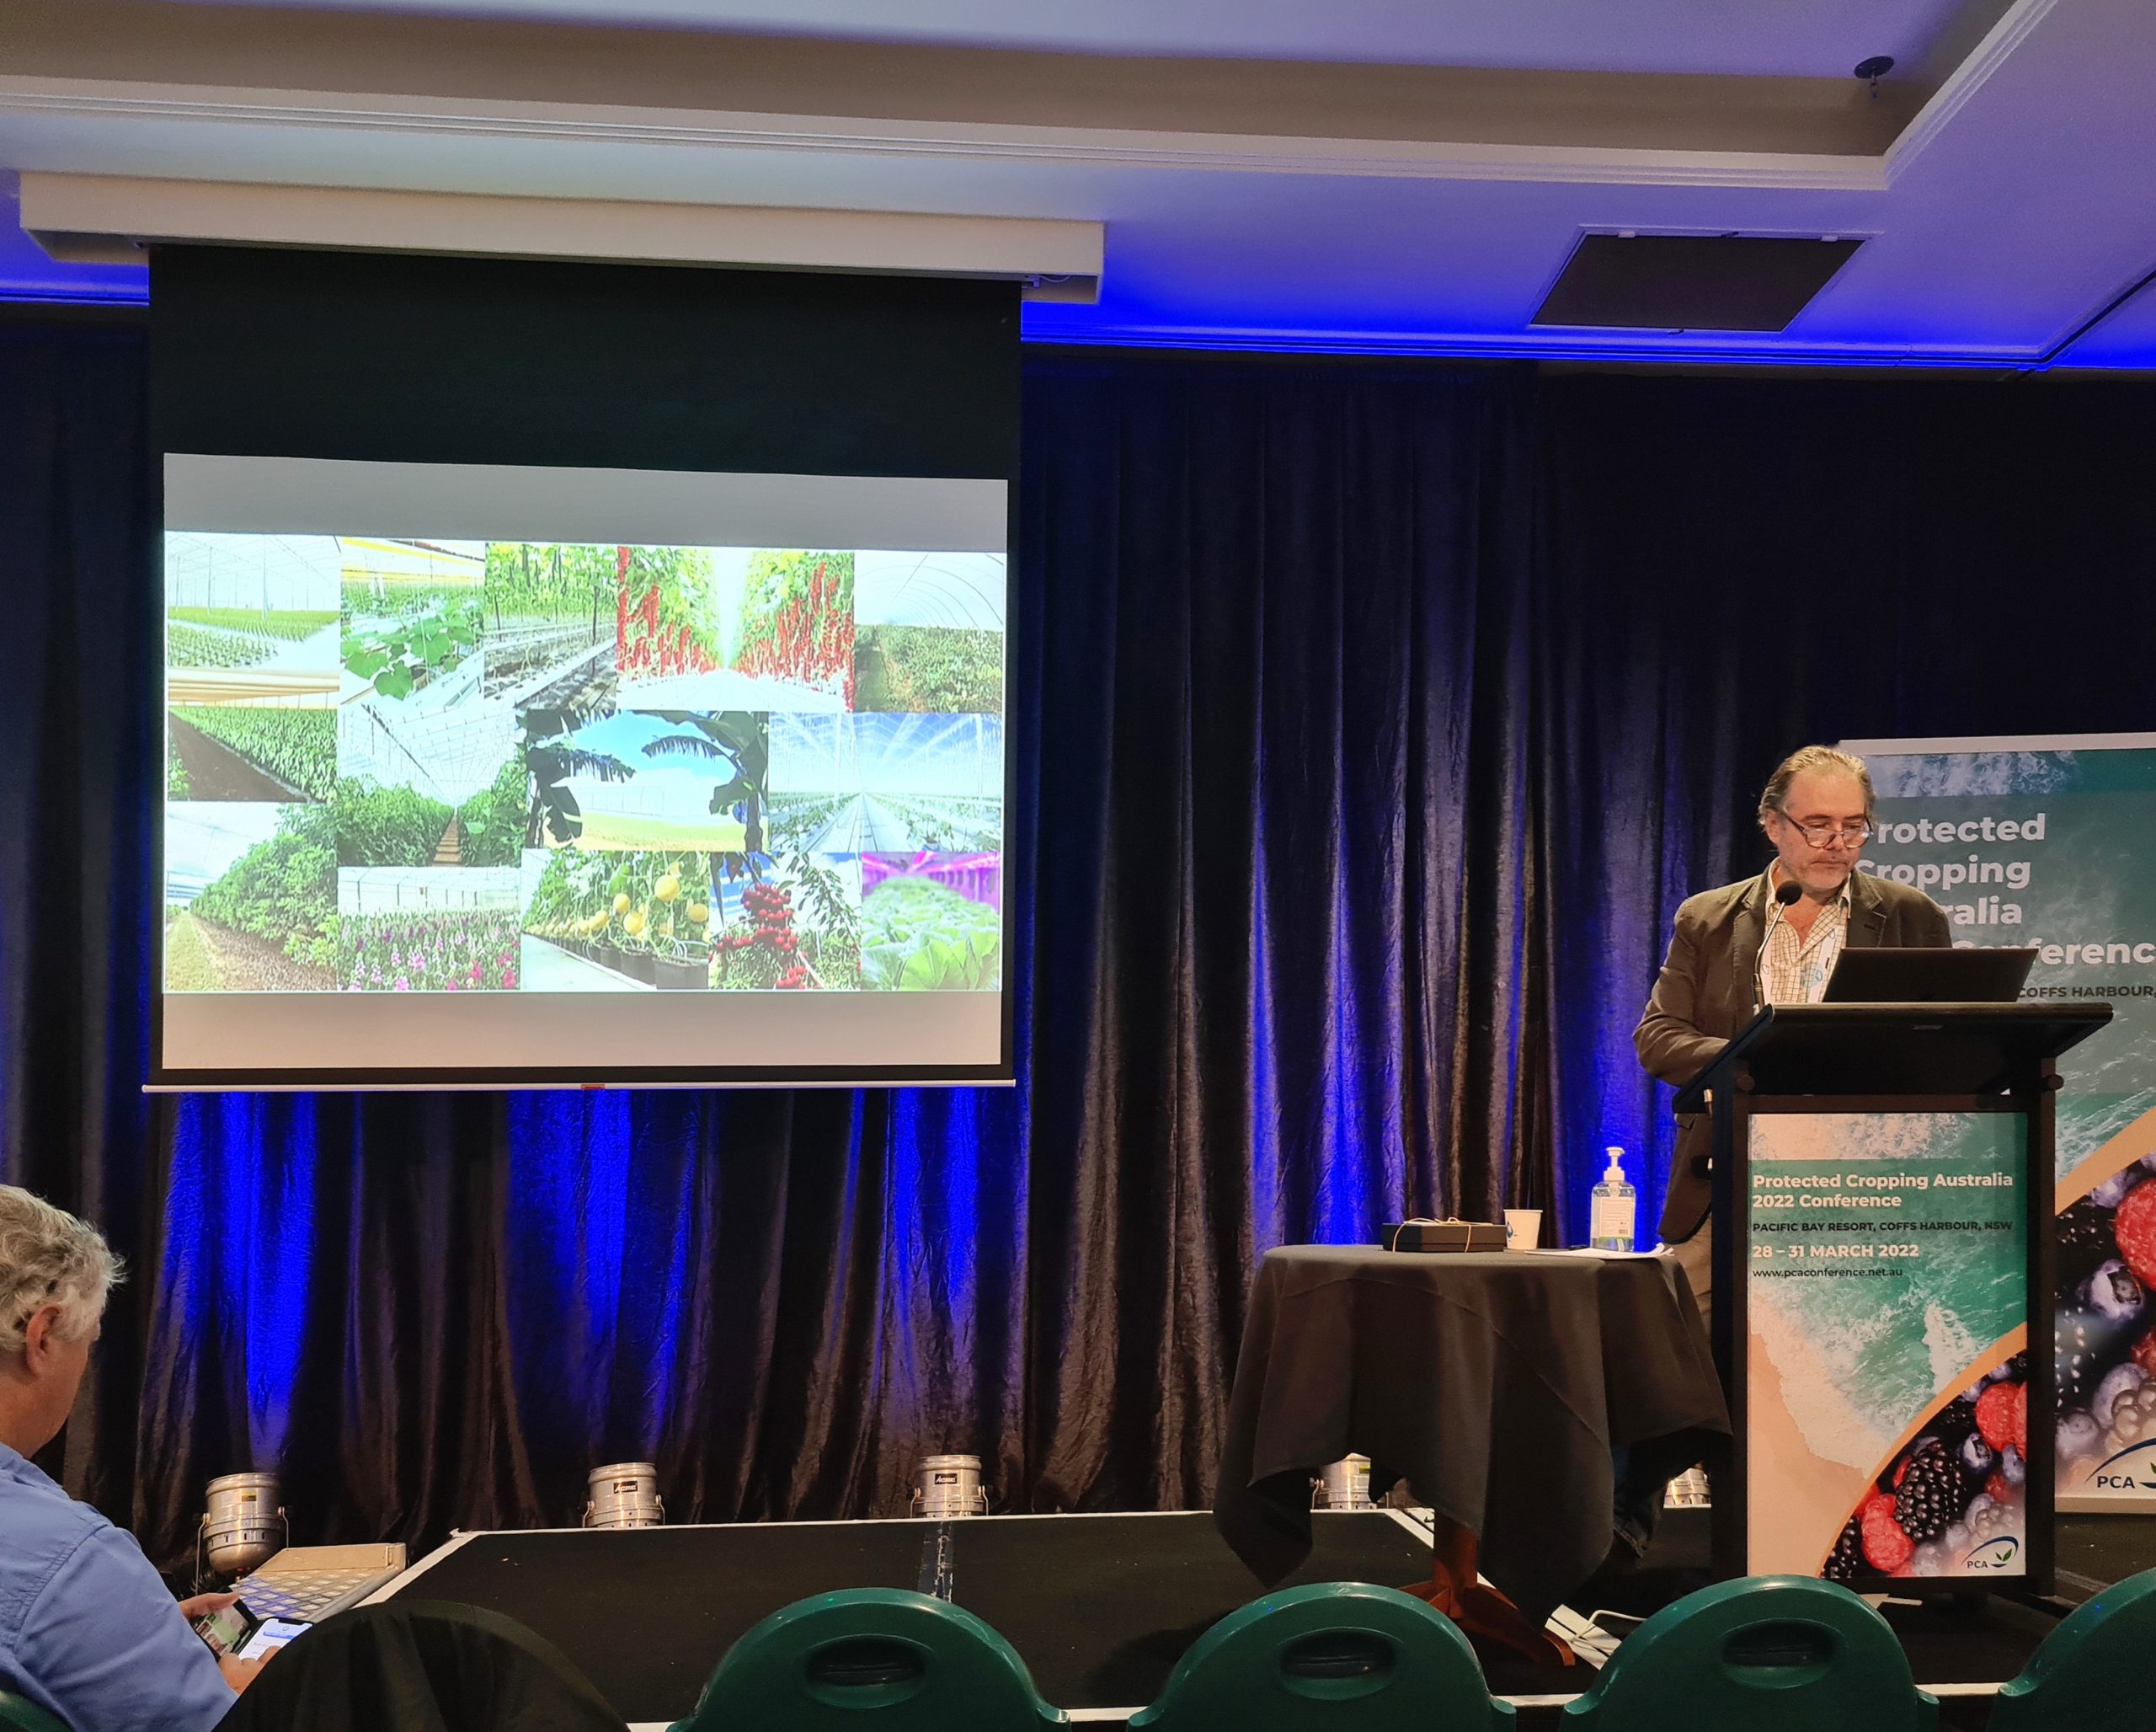 A nine-year strategy for those growing crops undercover developed by QDAF with input from key stakeholders including FIAL and the CRC is set to be implemented by Protected Cropping Australia and Hort Innovation.